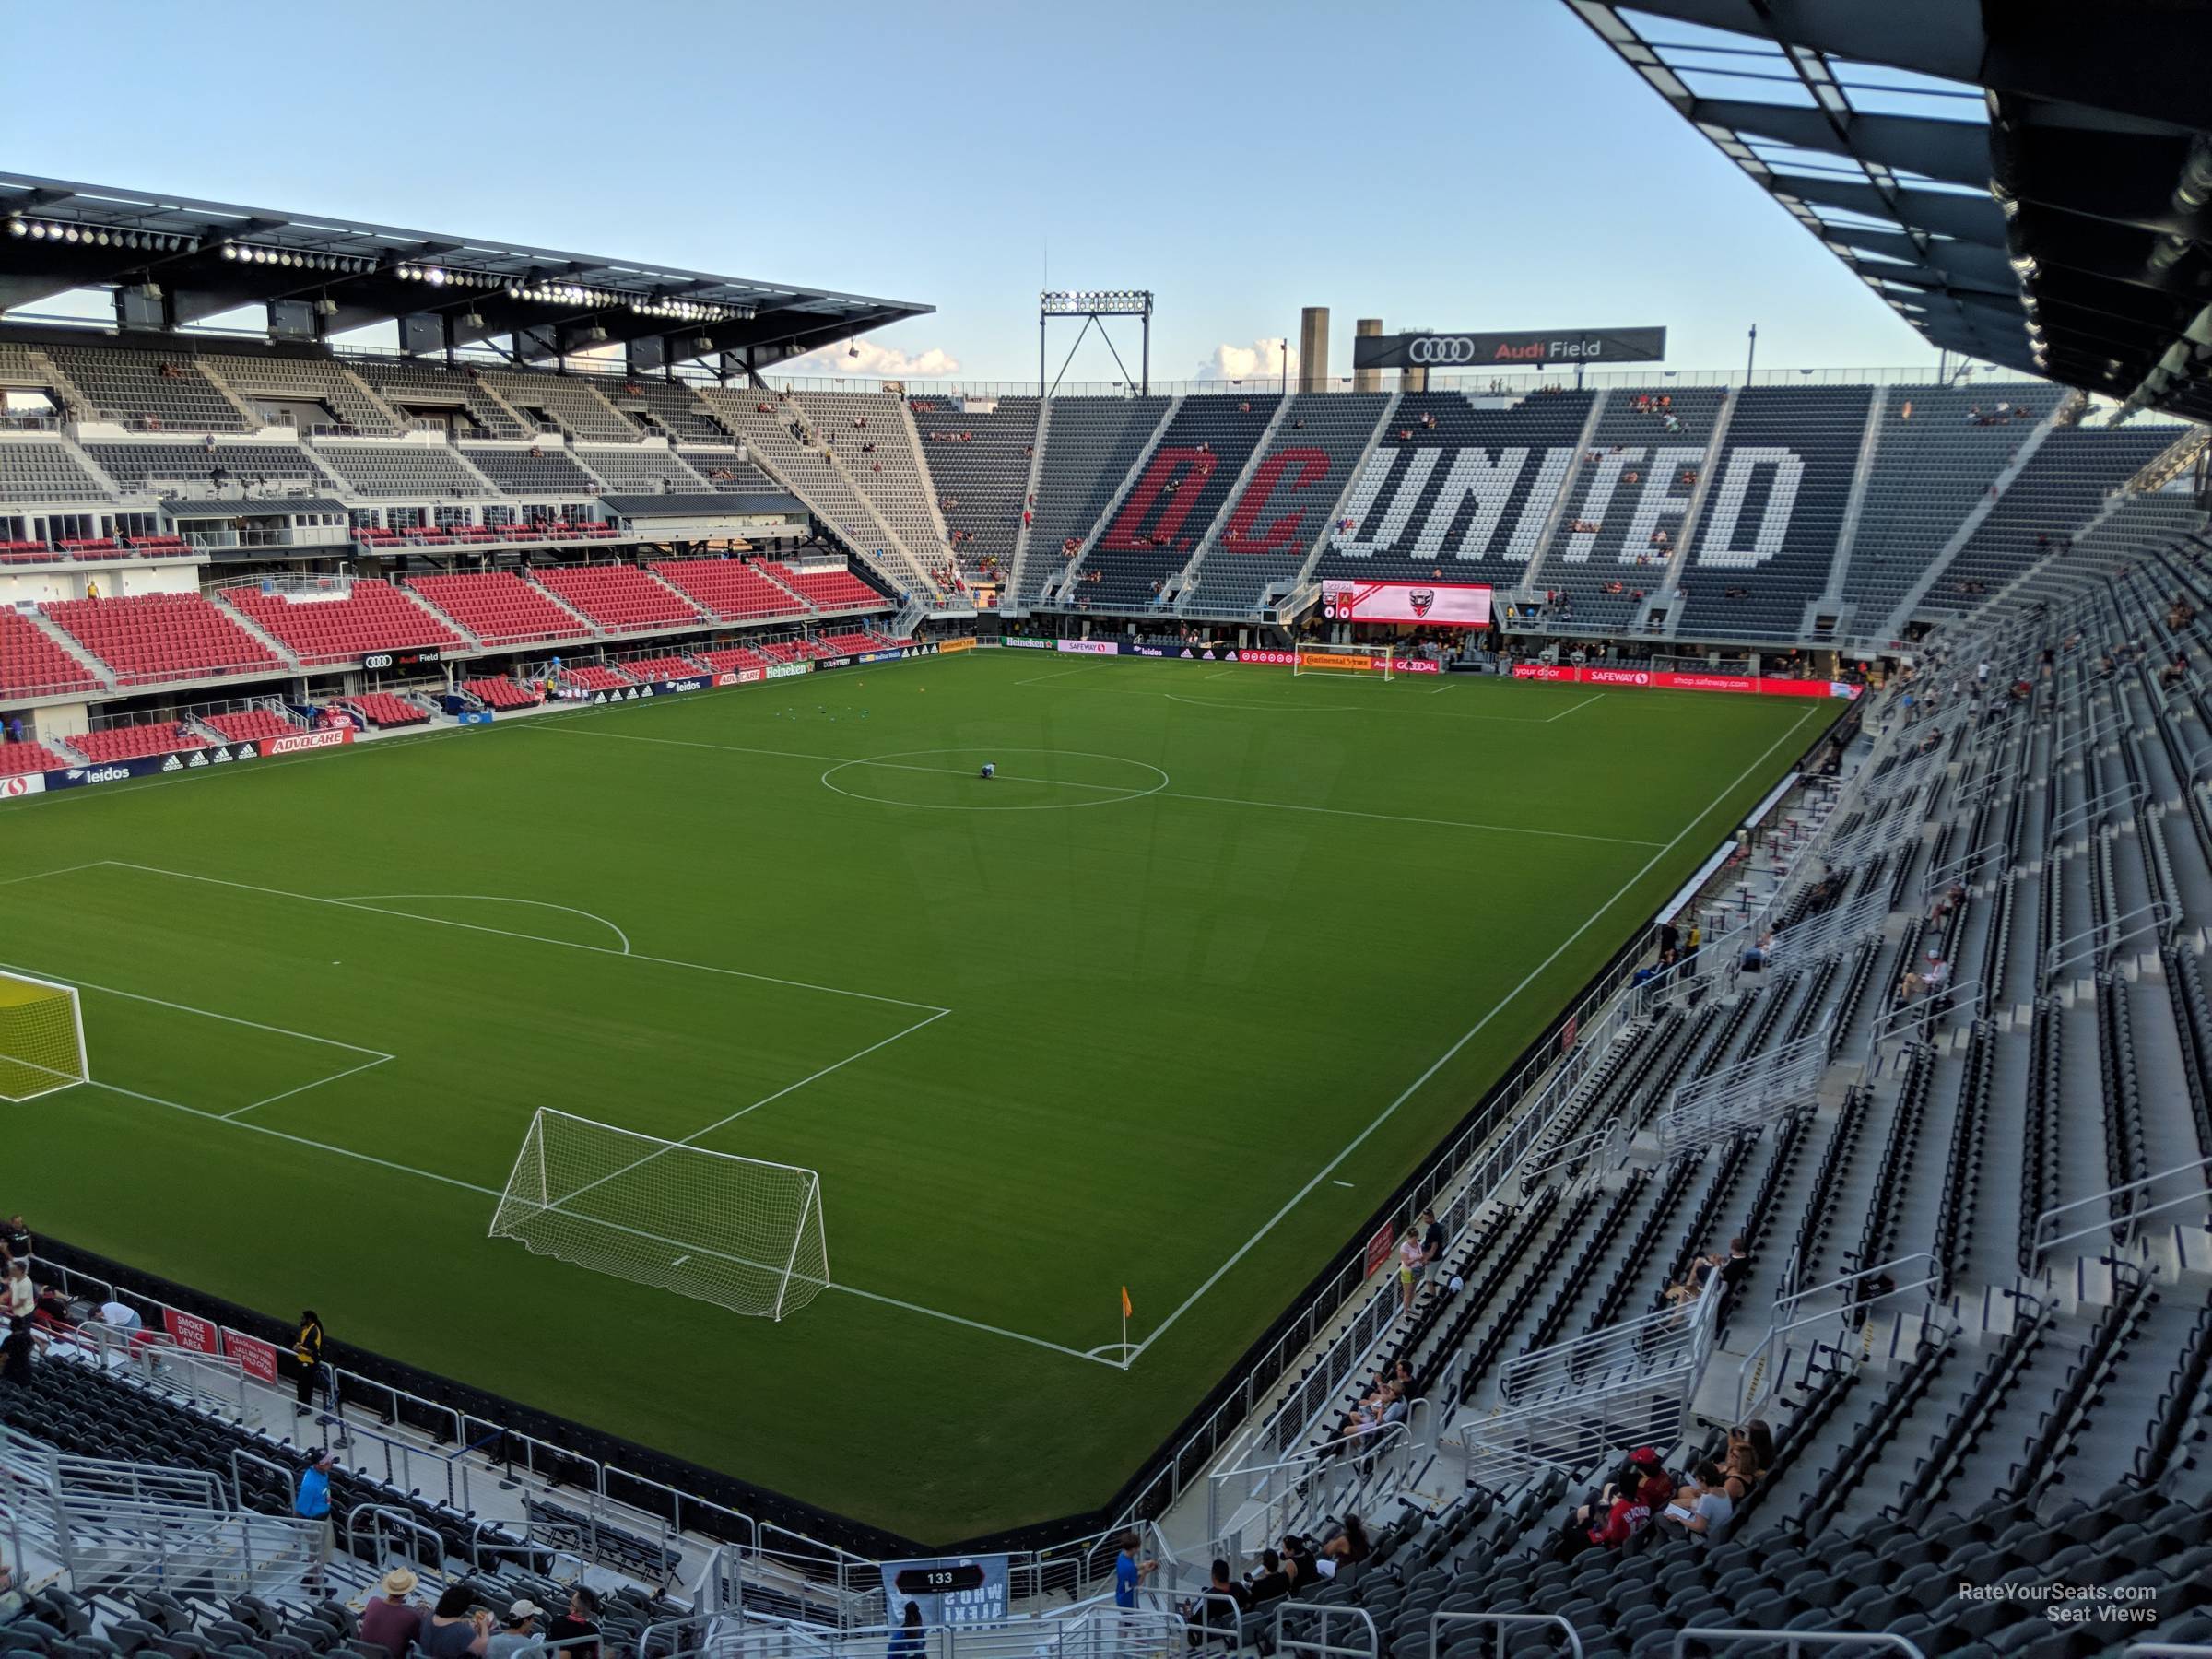 section 133, row 24 seat view  - audi field